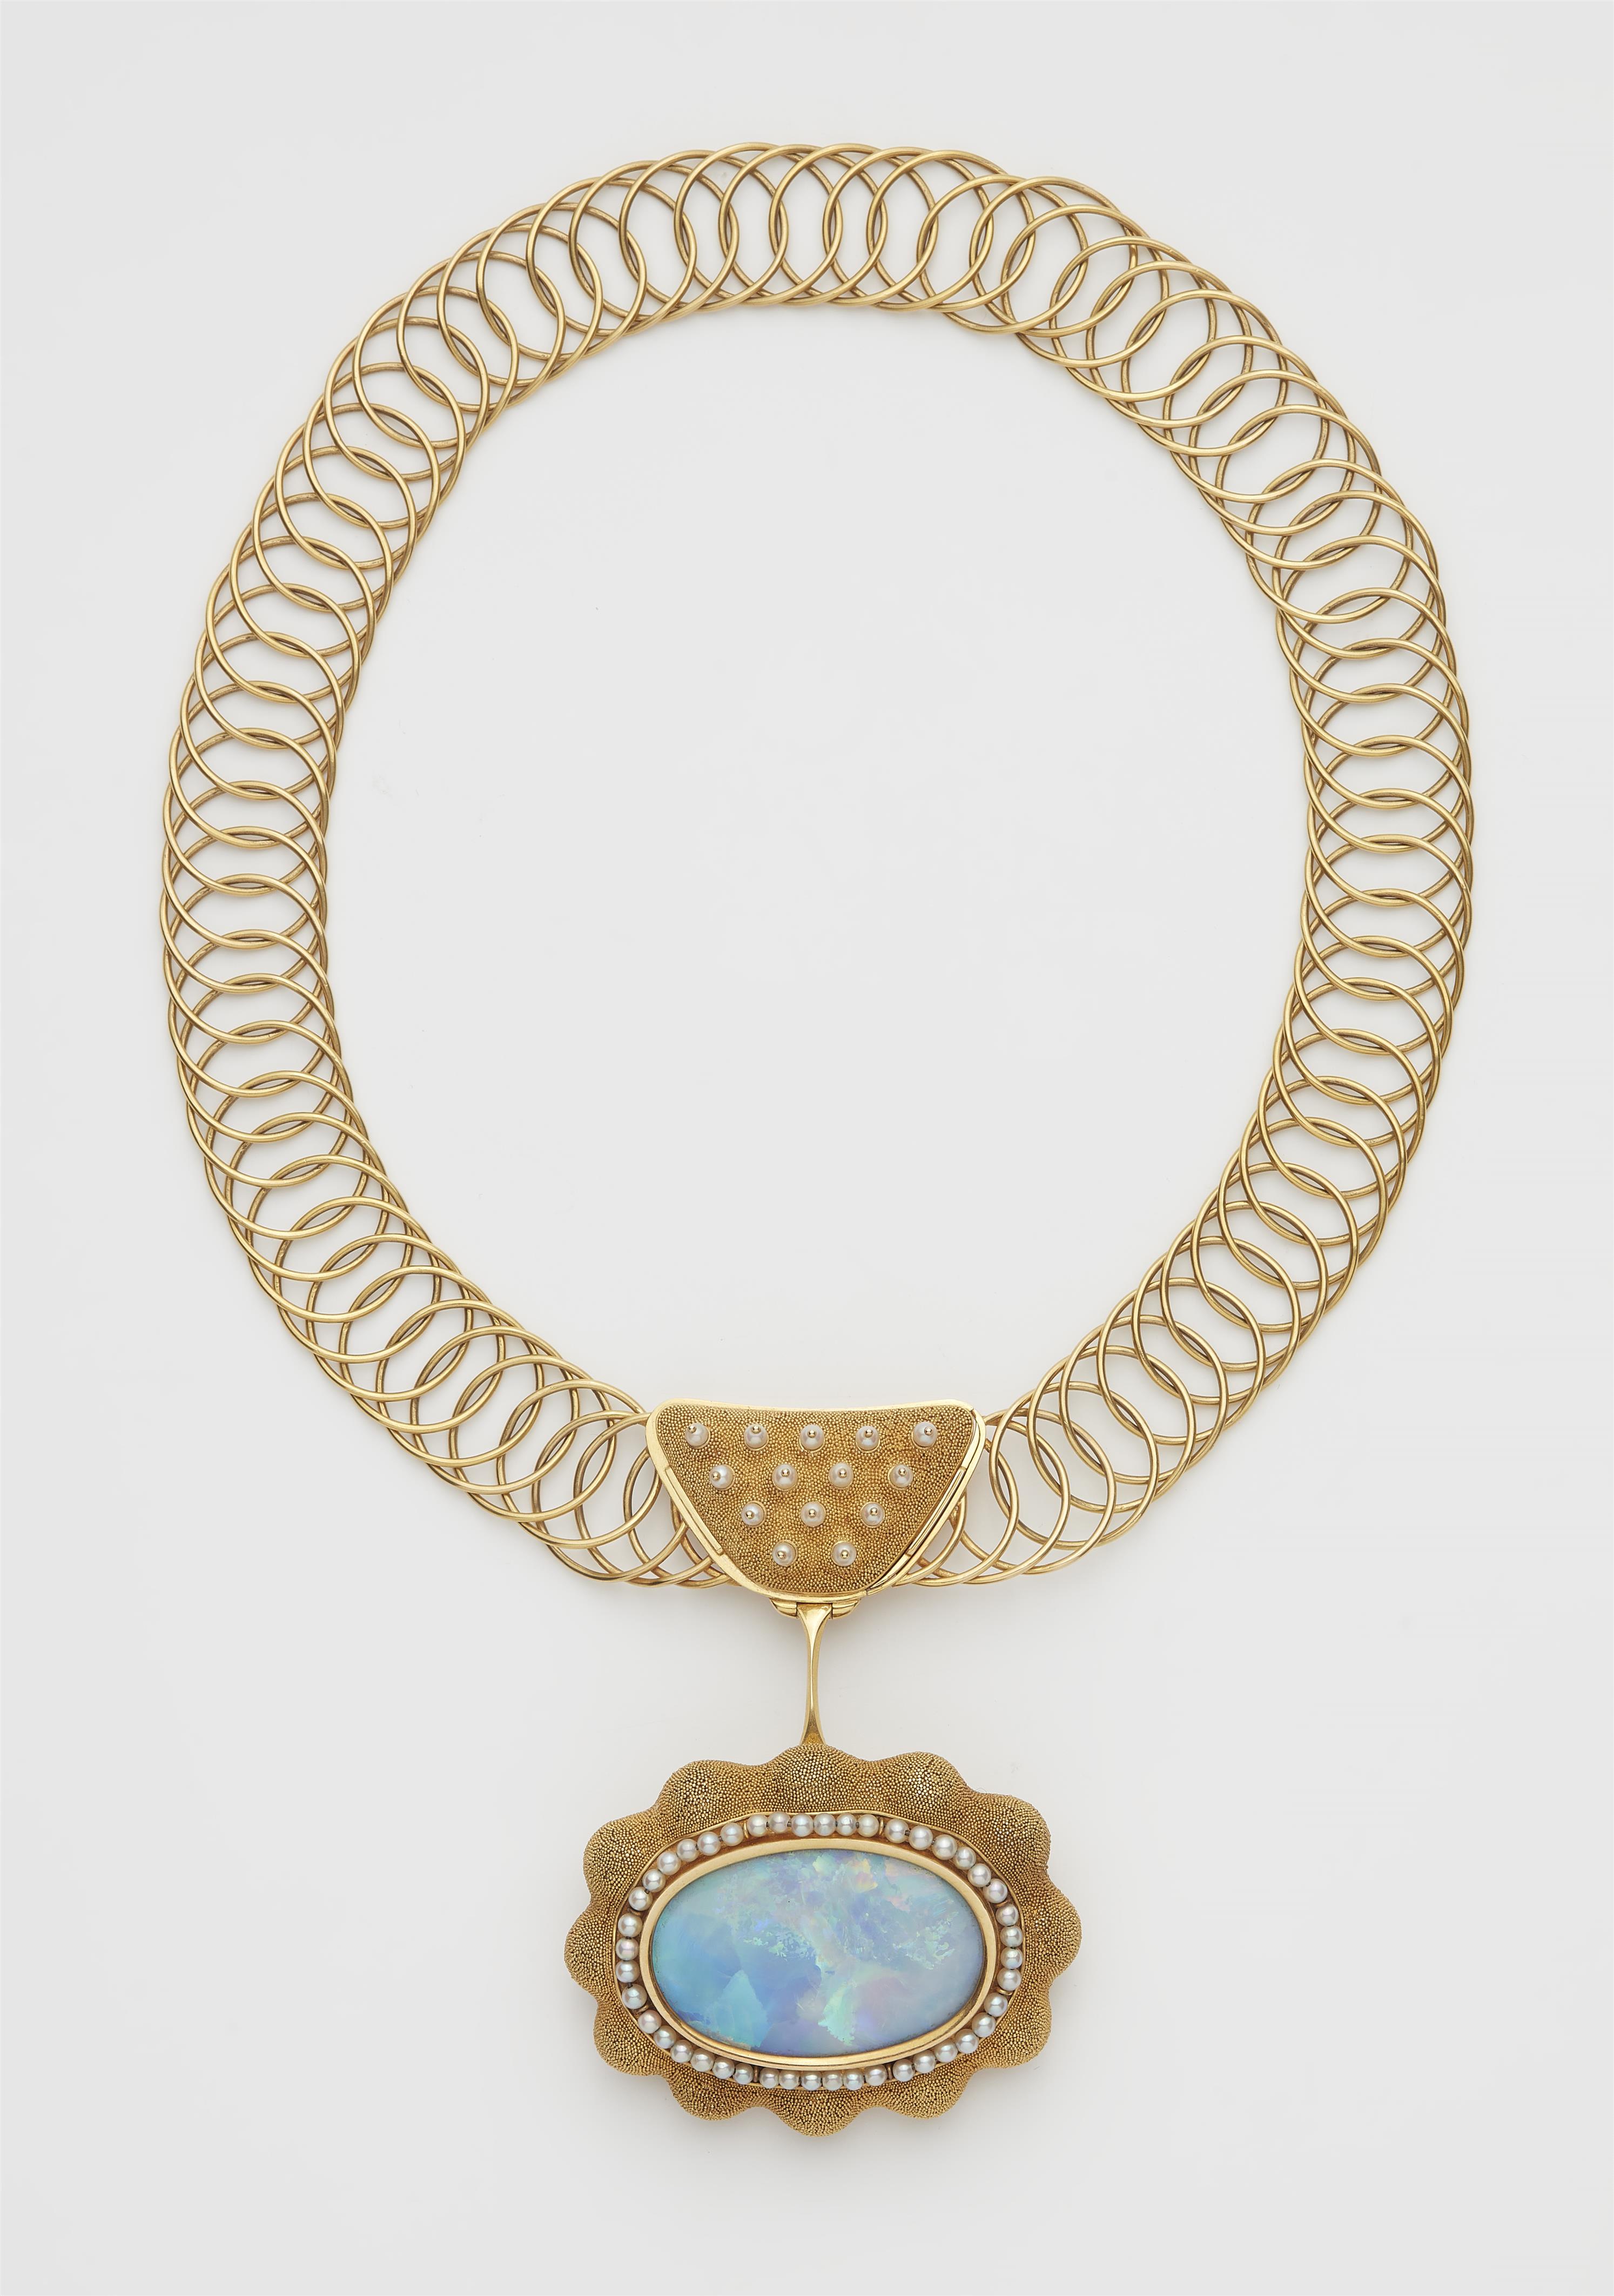 A German hand-forged 18k gold wire necklace with a large granulation and black opal pendant brooch. - image-1